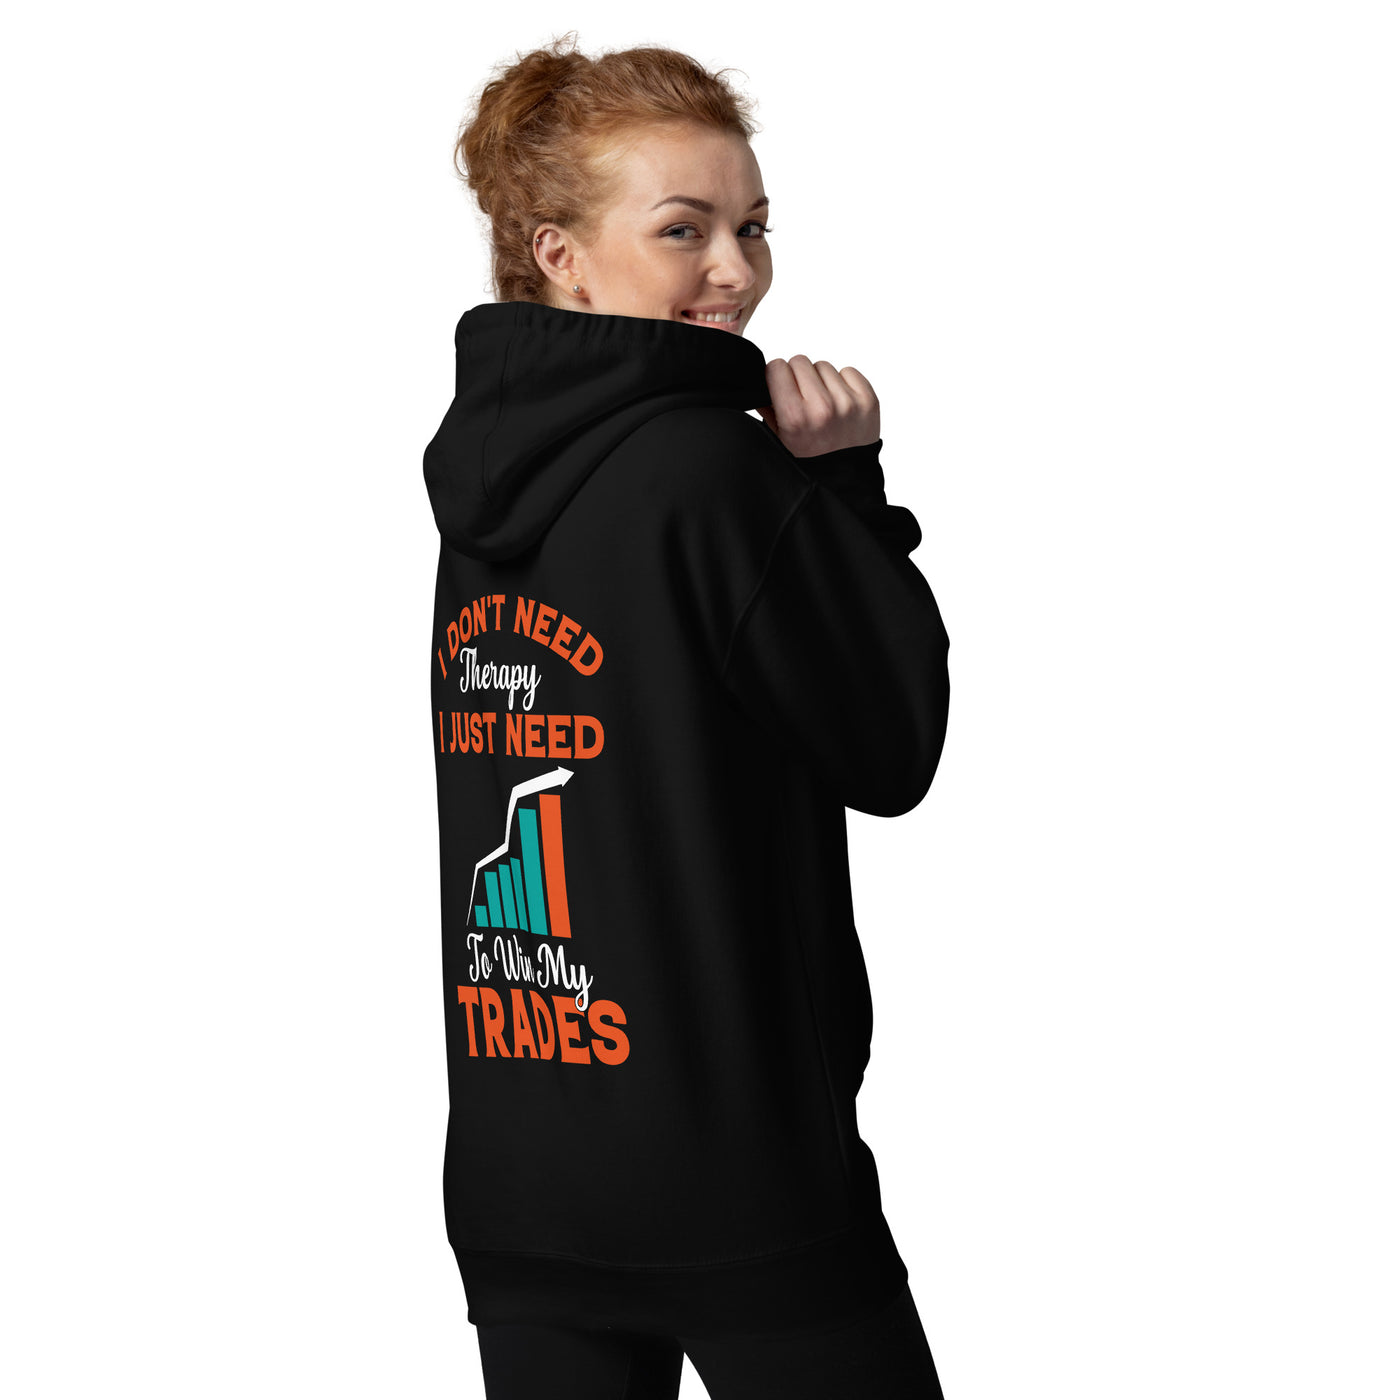 I don't Need therapy, I just Need to Win my Trades - Unisex Hoodie ( Back Print )